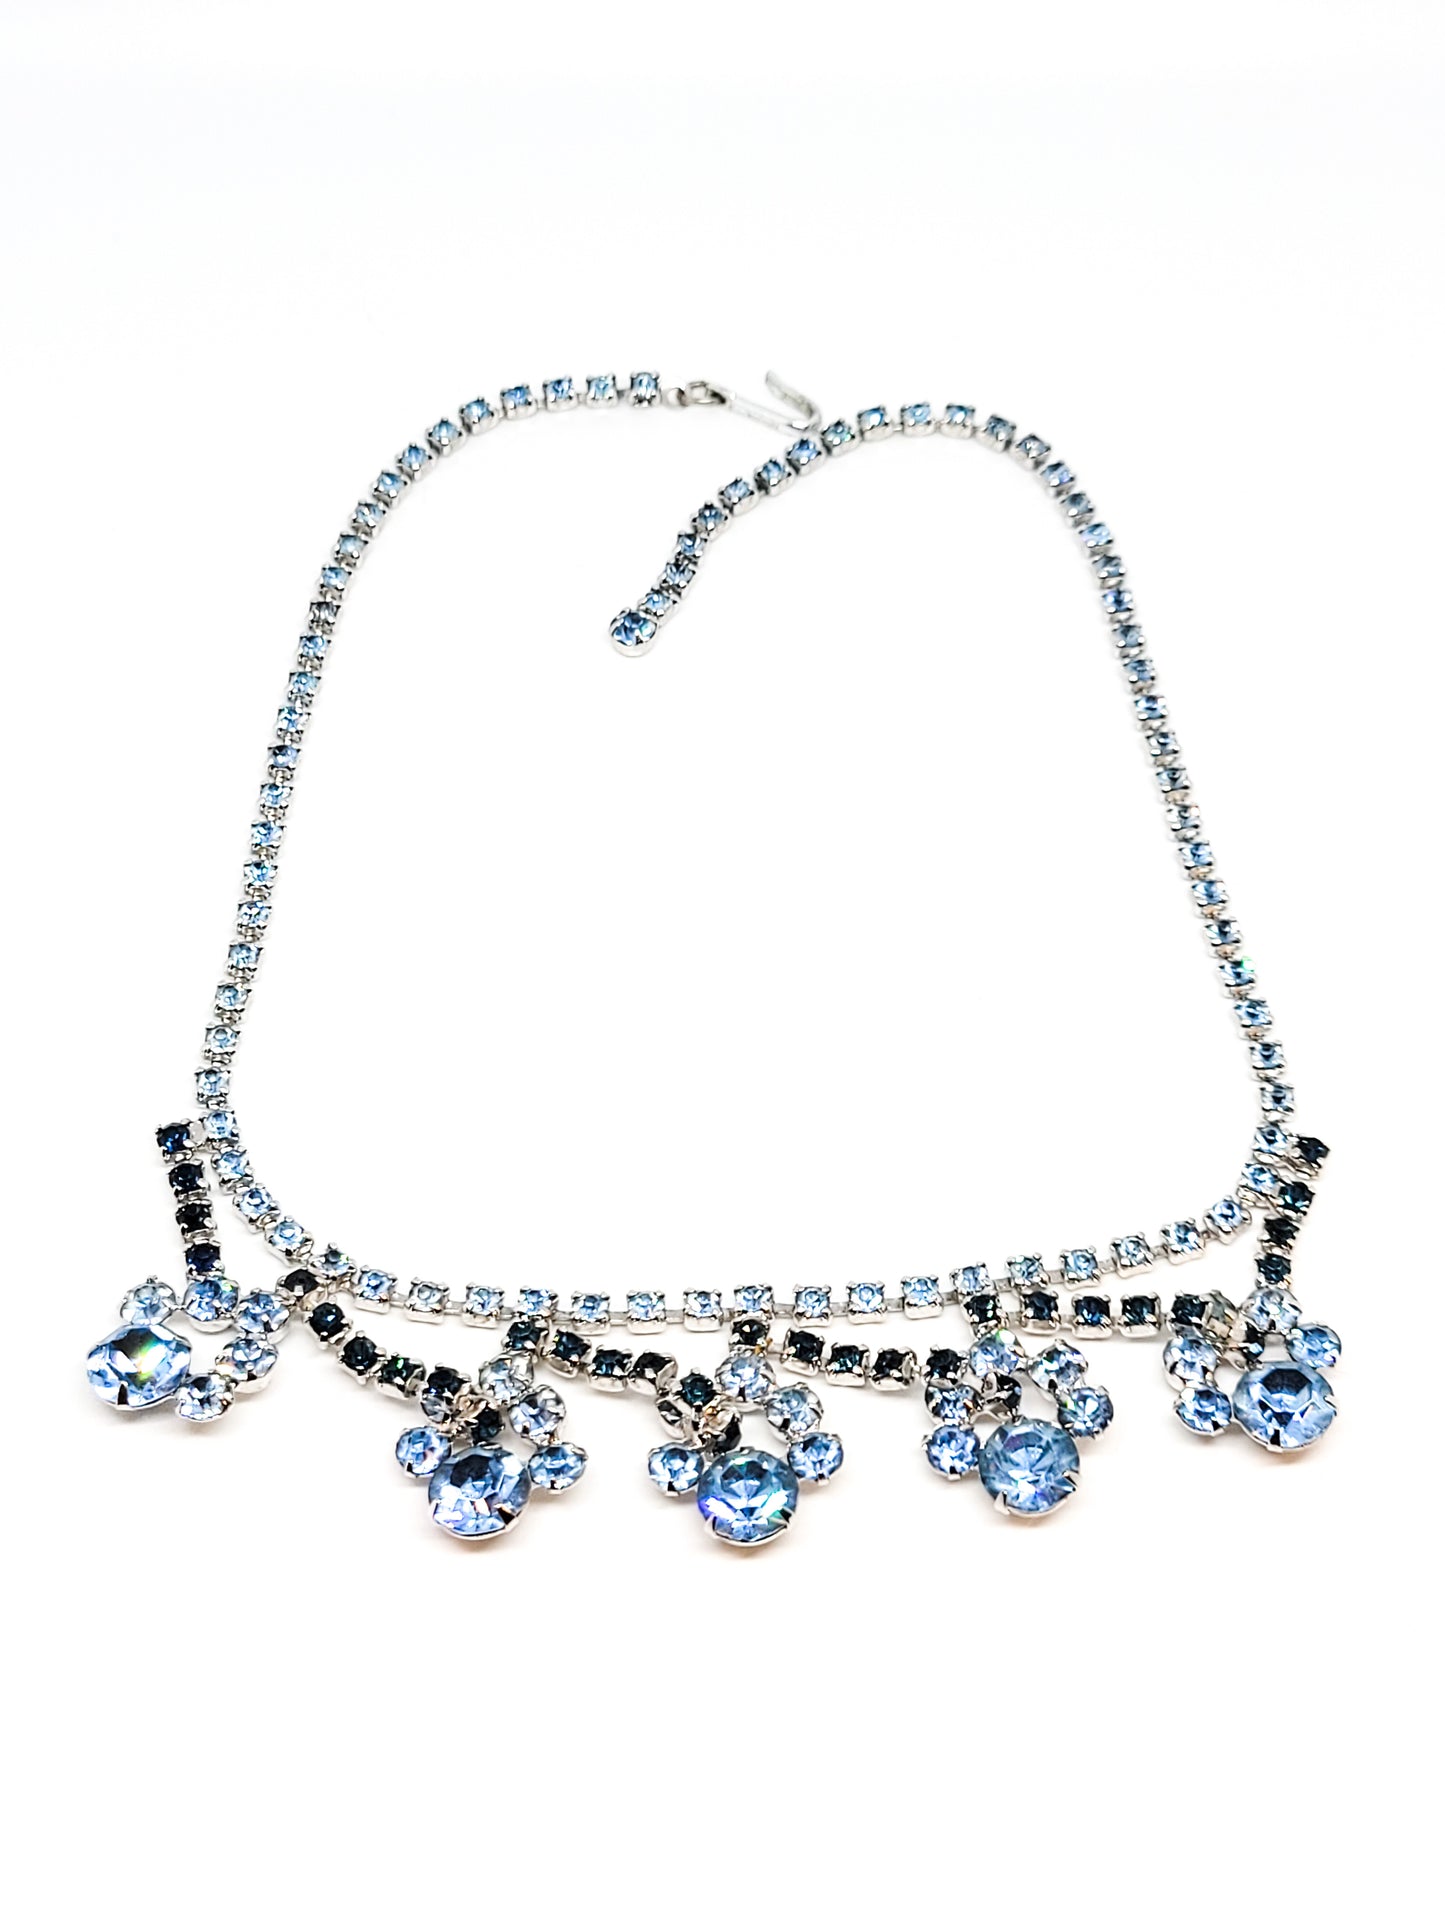 Something blue navy and baby blue rhinestone cupped flower bib vintage necklace